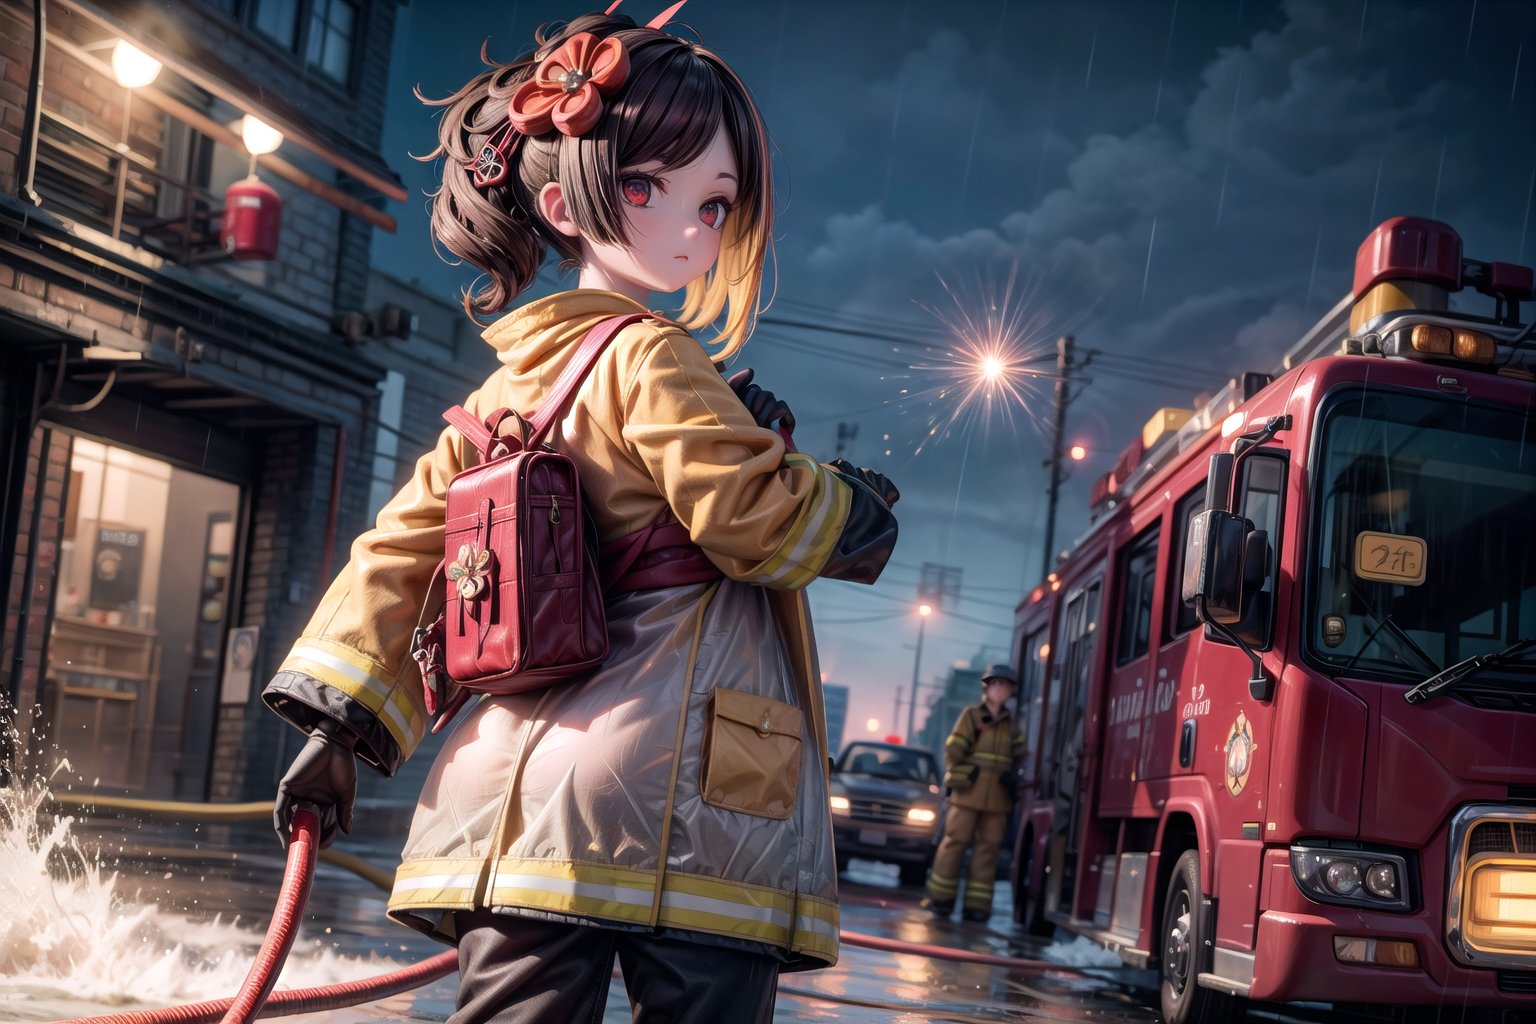 chiori, the fire chief, stands next to her fire truck in full firefighter uniform: helmet, coat, pants and gloves. In her right hand she holds a fire hose, the camera captures her full size, with the fire engine in the background, casting a warm light on her determined face. show yourself to me in full firefighter uniform, all wet uniform, rainy weather,